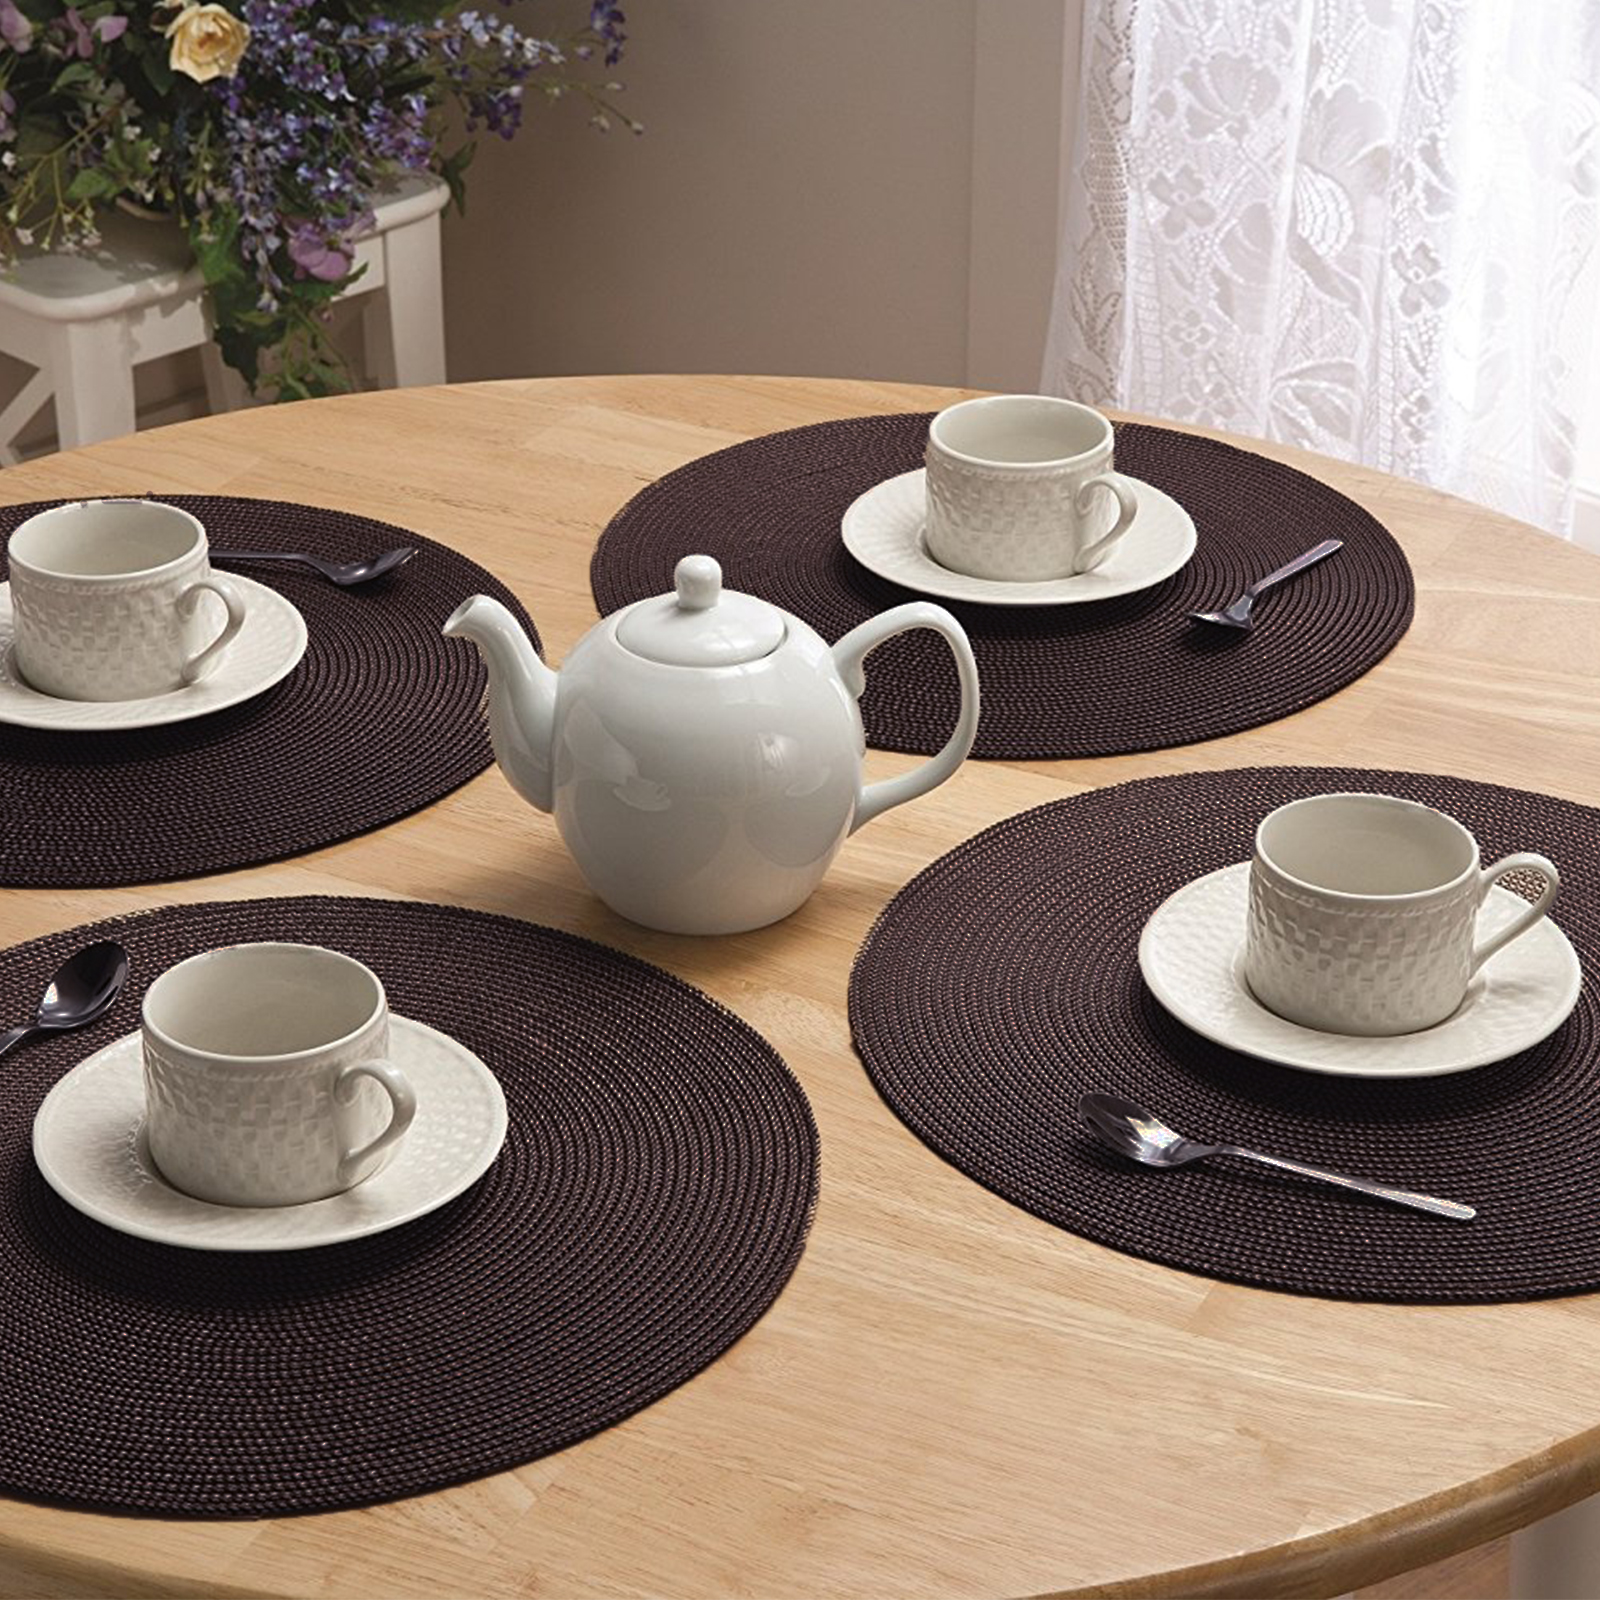 Best Placemats For Round Table, Round Table Placemats Set